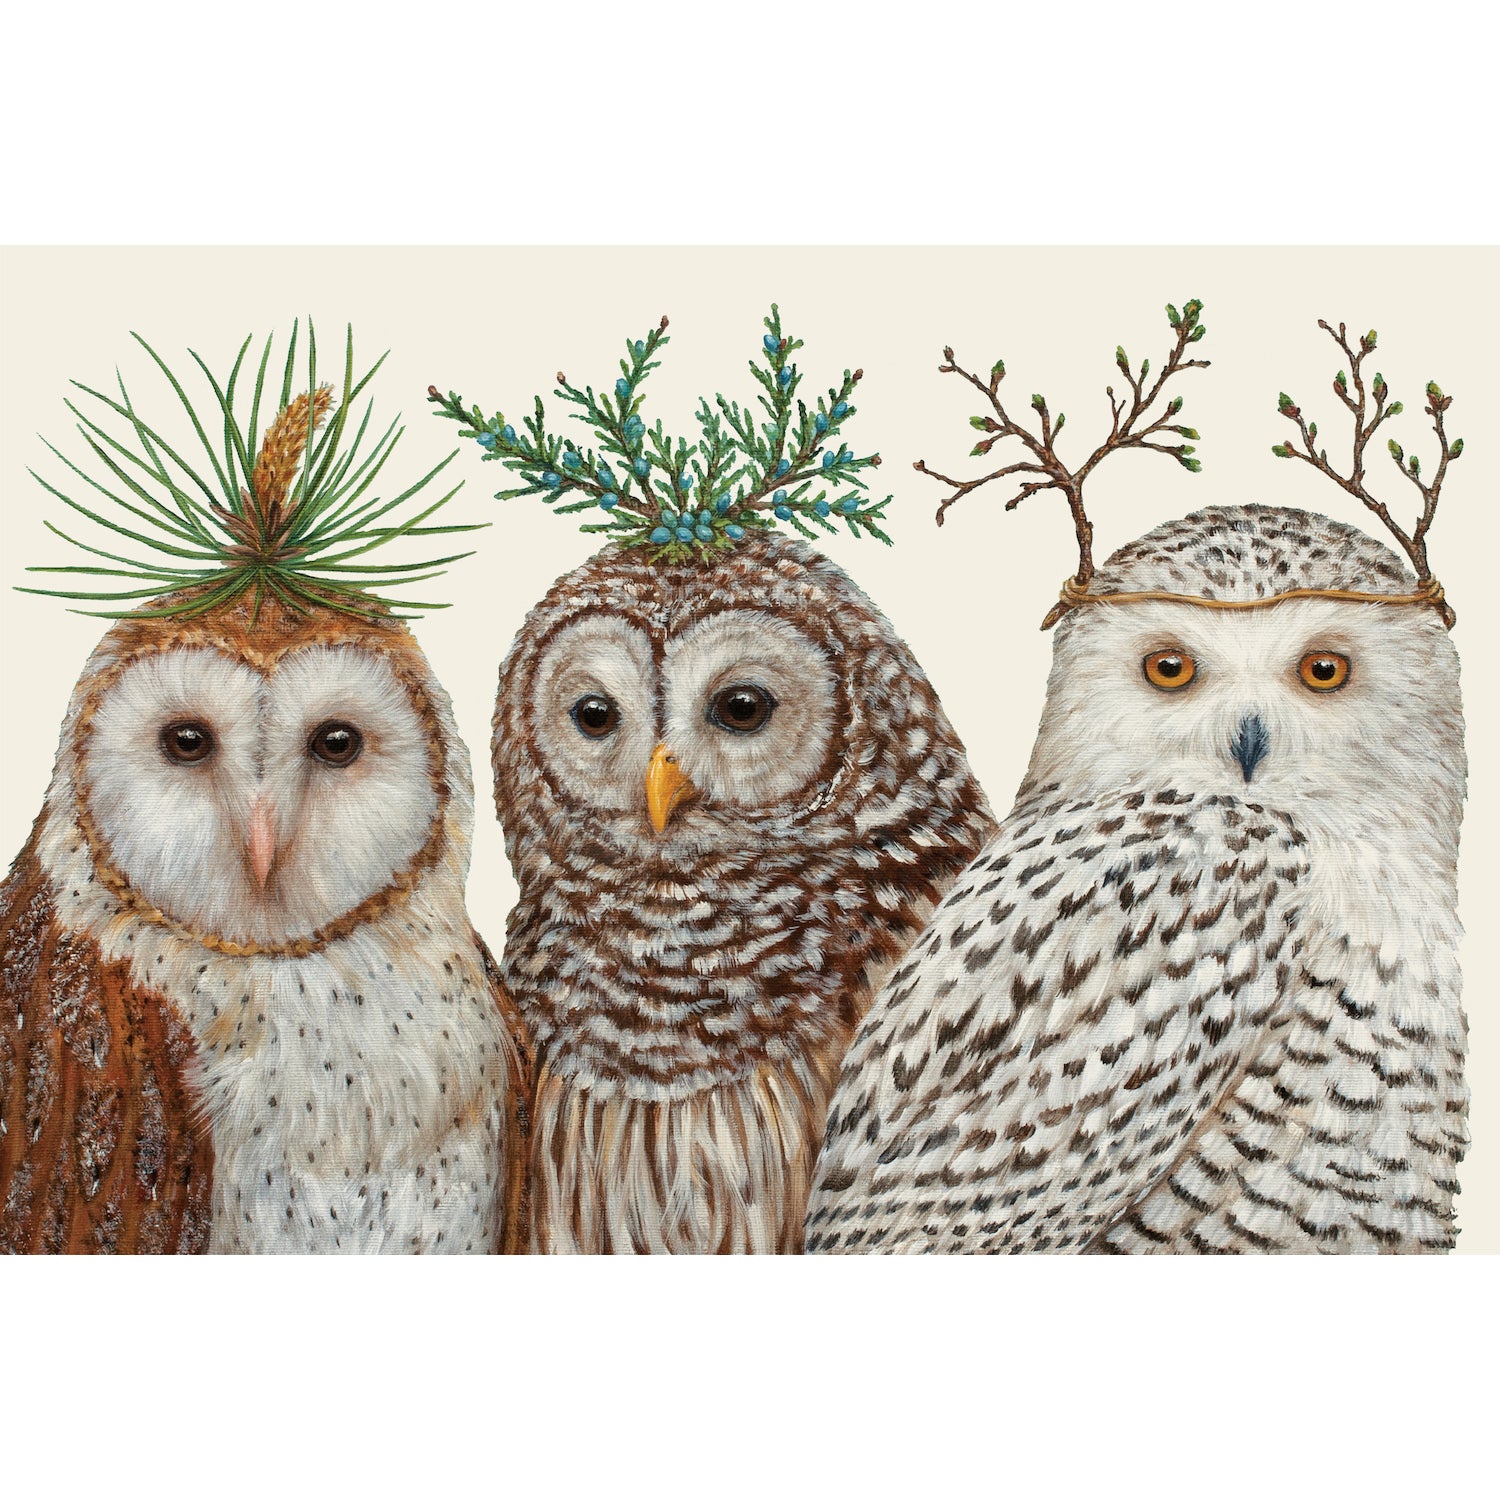 Artist Vicki Sawyer creates a whimsical tablescape featuring Winter Owls Placemats by Hester &amp; Cook, depicting three owls donning pine cones on their heads, all printed on paper placemats.